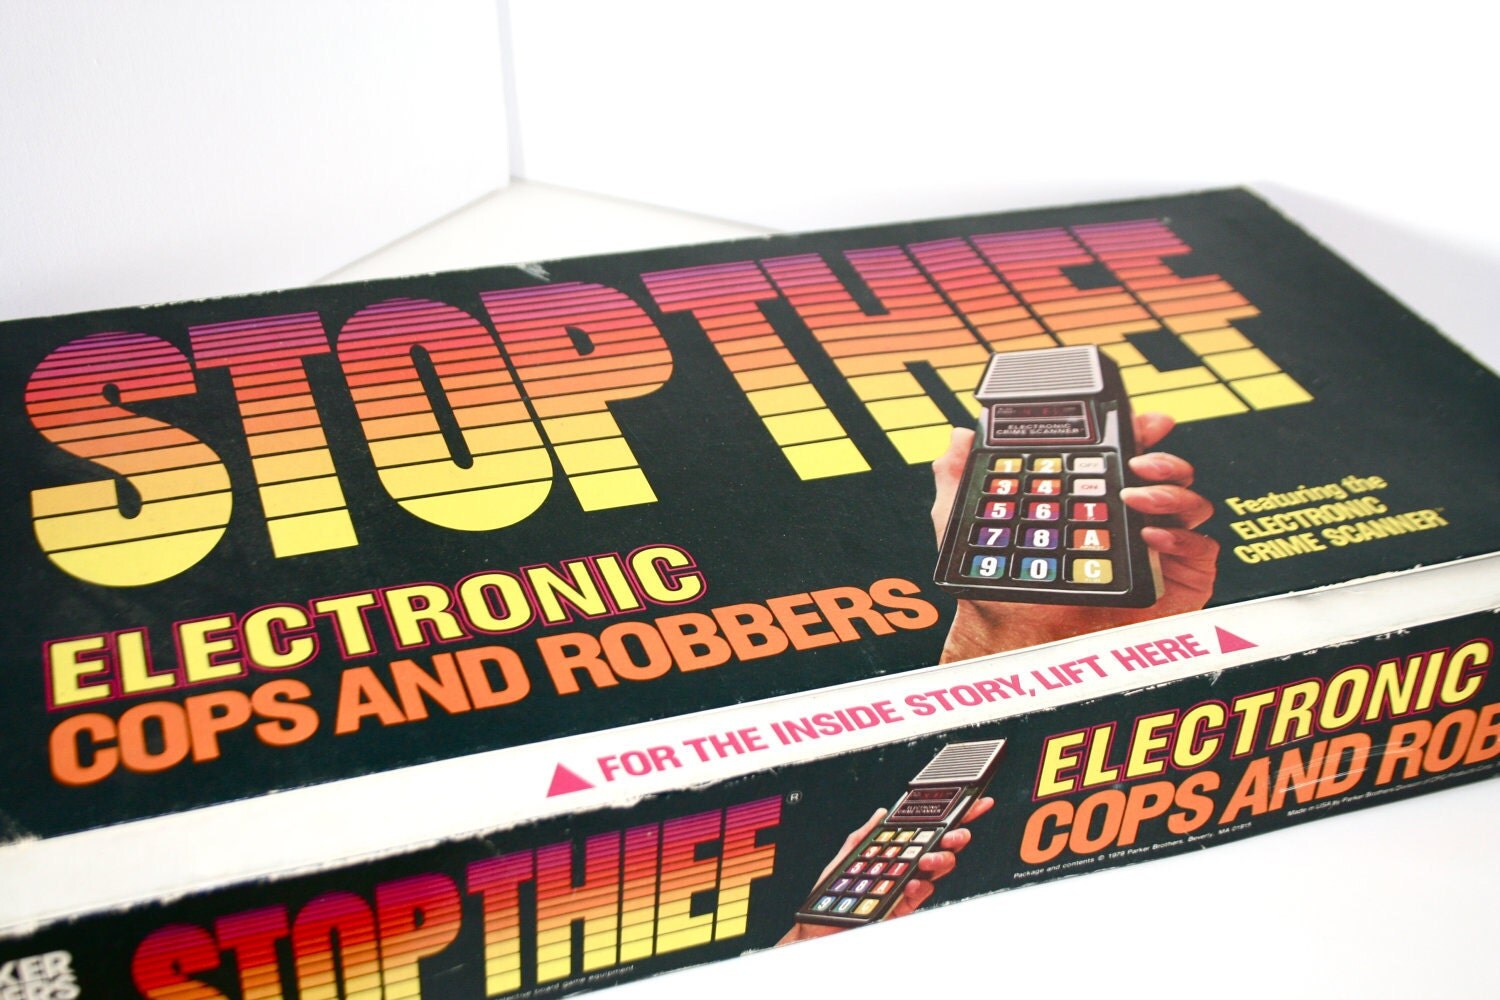 stop thief board game